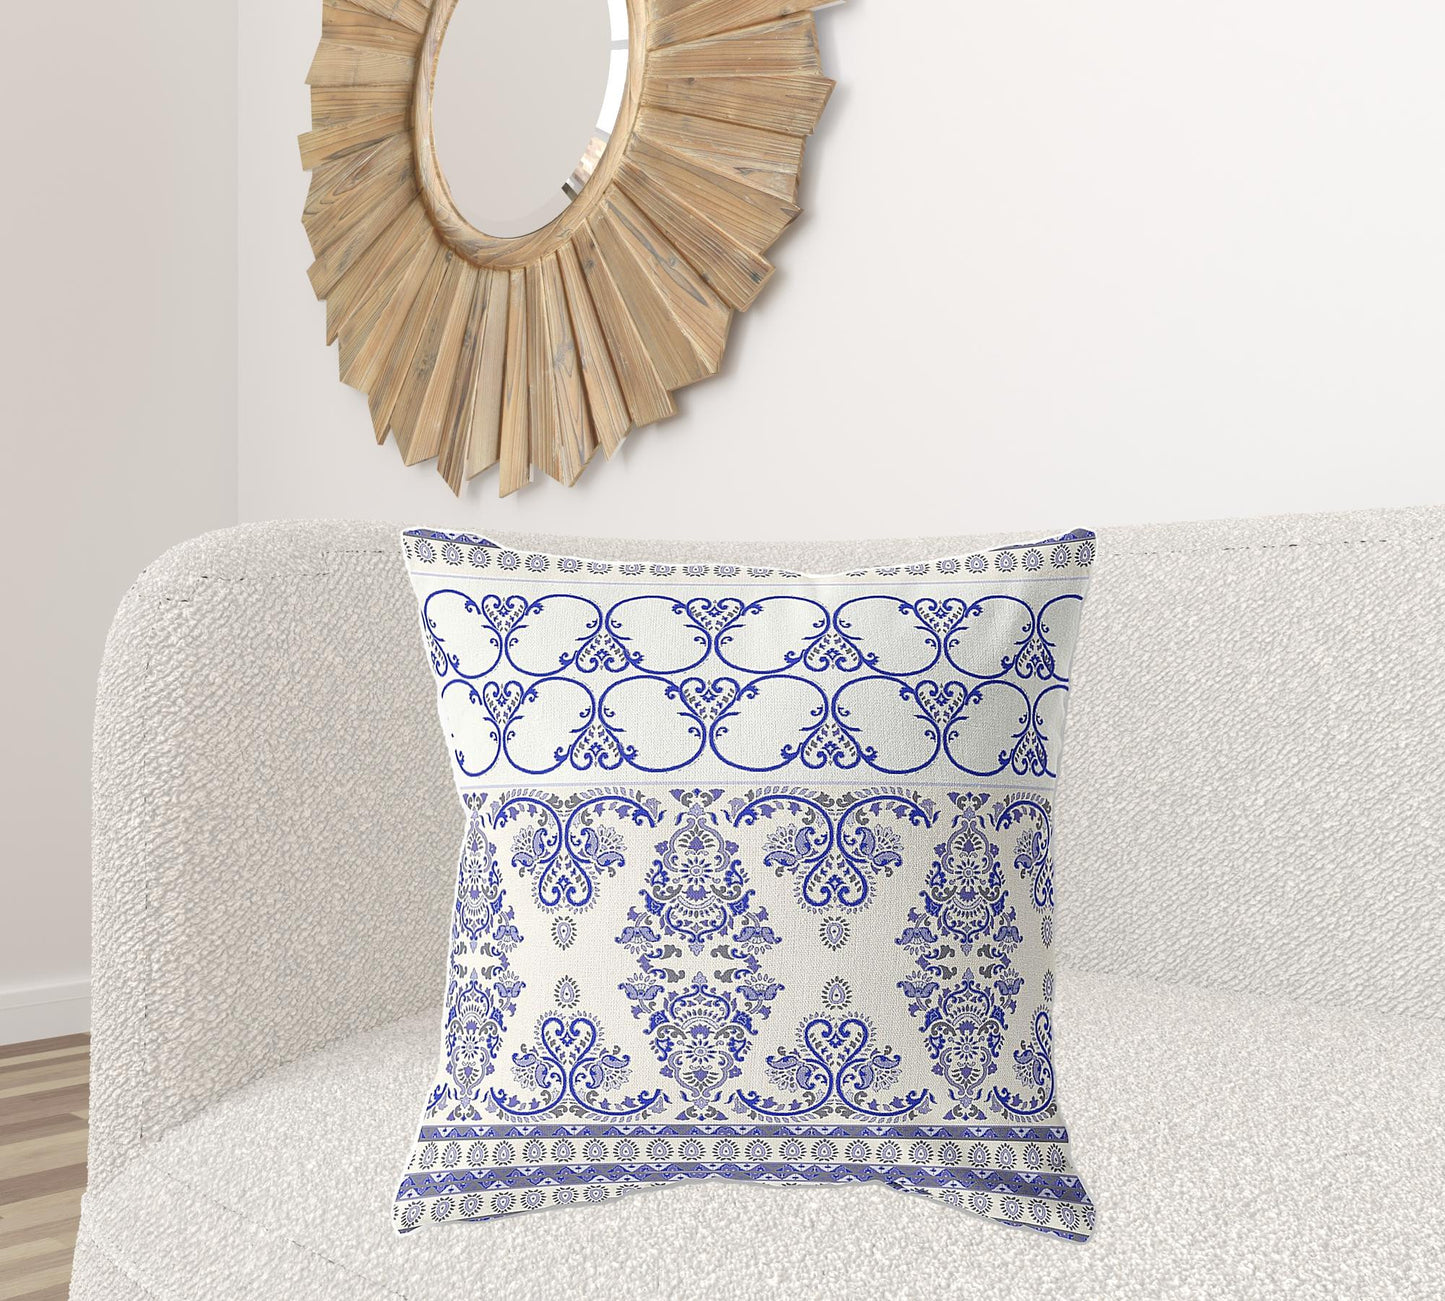 18"x18" Off White And Purple Zip Broadcloth Damask Throw Pillow